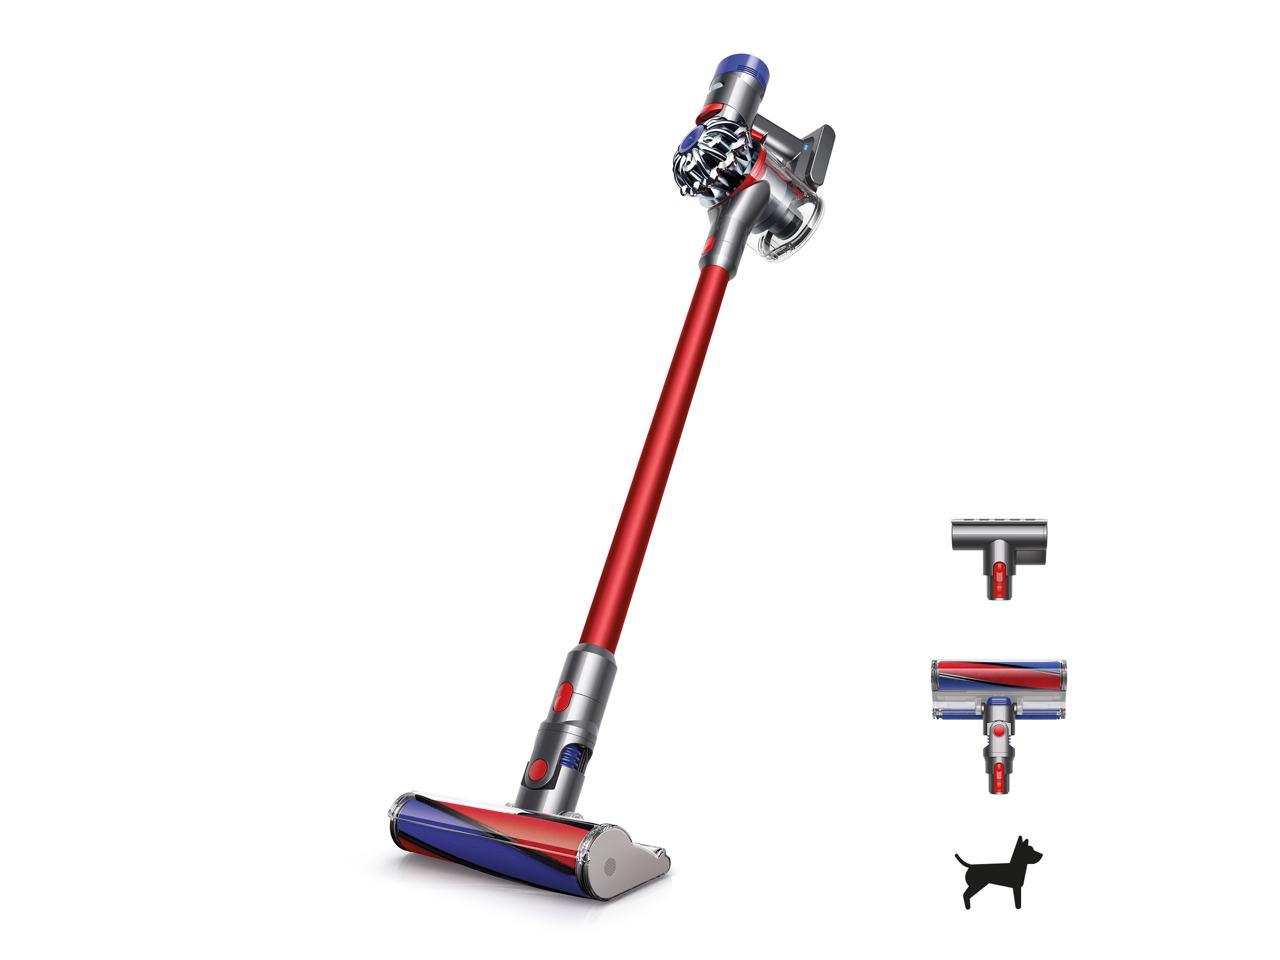 Dyson V8 Fluffy Cordless Vacuum - Red / New Condition $299.99